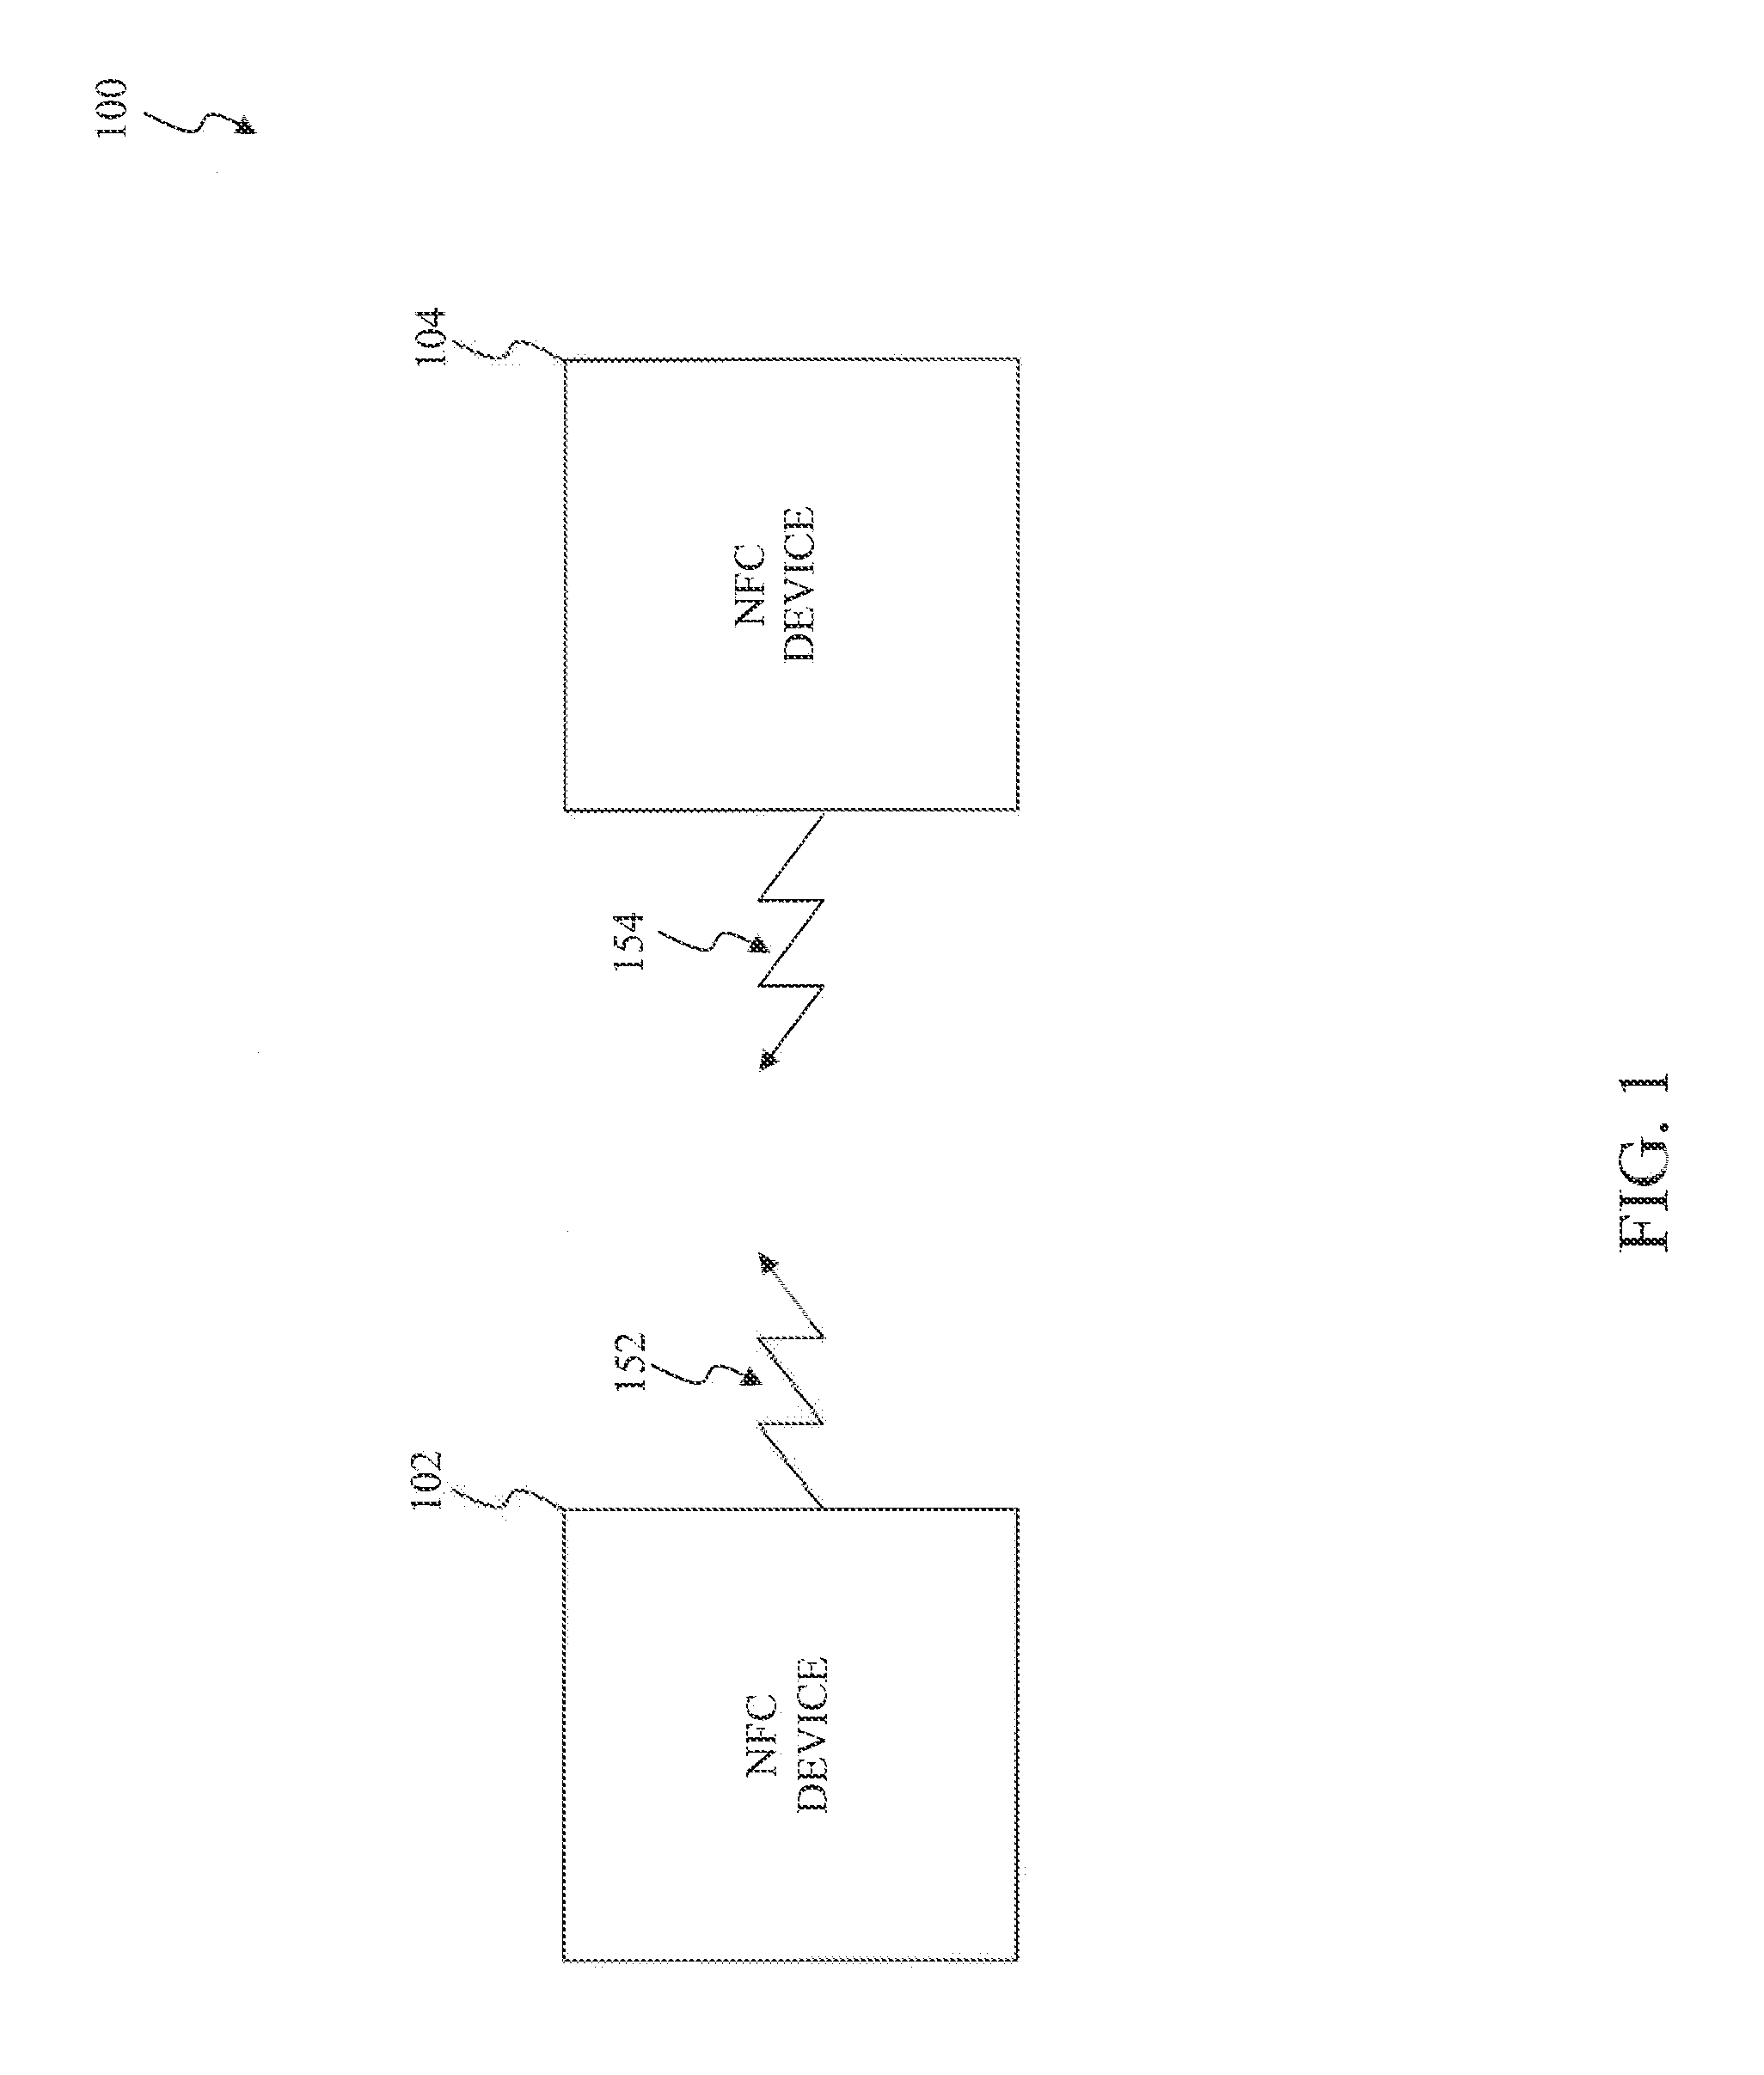 Detecting a Presence of Near Field Communications (NFC) Devices